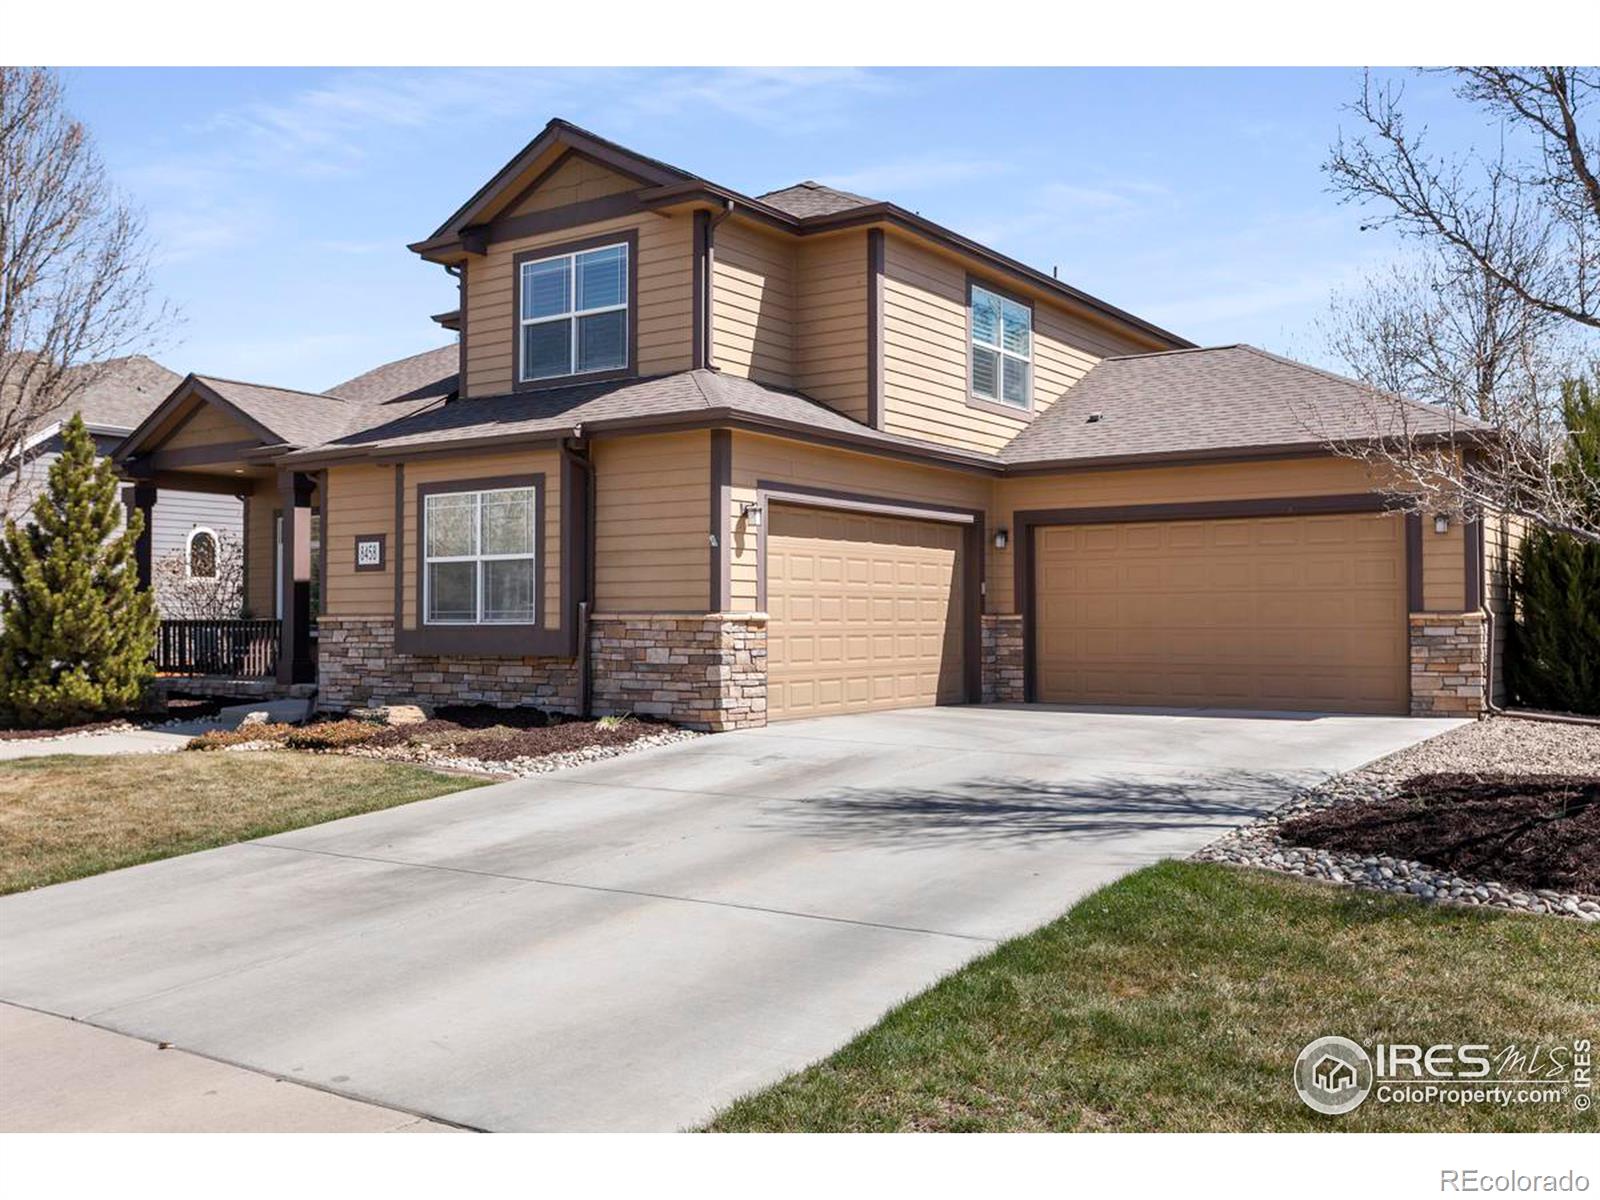 Report Image for 8458  Stay Sail Drive,Windsor, Colorado